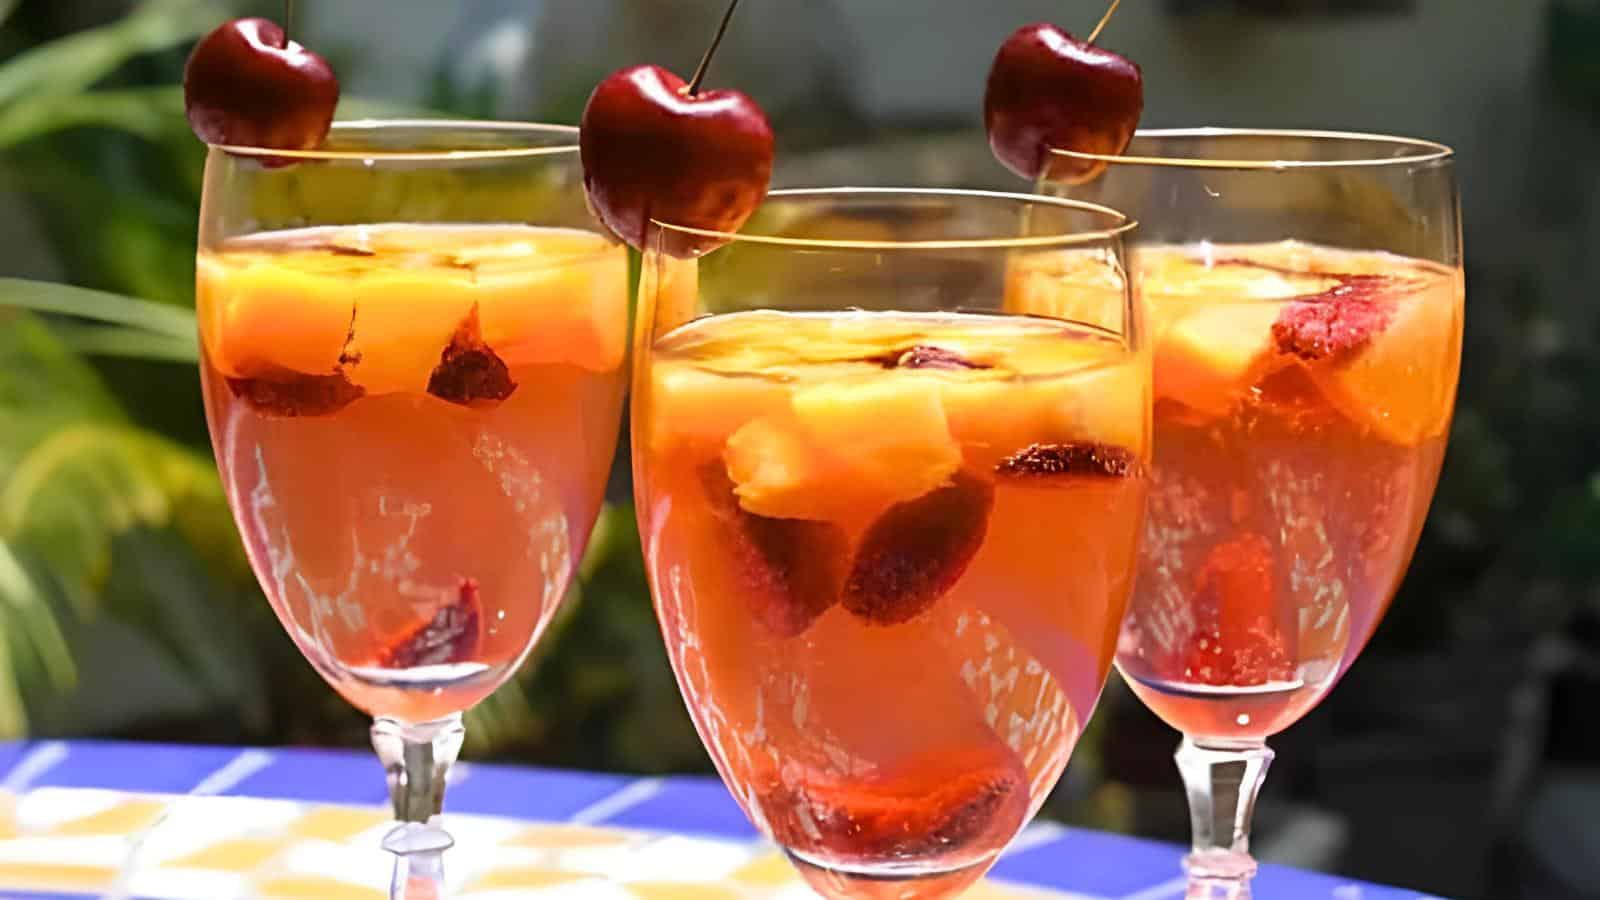 <p>This White Wine Summer Sangria Spritzer is light, bubbly, and full of fruity goodness. Mixing white wine, sparkling water, and a medley of fresh fruits, it’s a refreshing cocktail choice for any gathering.<br><strong>Get the Recipe: </strong><a href="https://www.christinascucina.com/white-wine-summer-sangria-spritzer/?utm_source=msn&utm_medium=page&utm_campaign=msn" rel="noopener">White Wine Summer Sangria Spritzer</a></p>